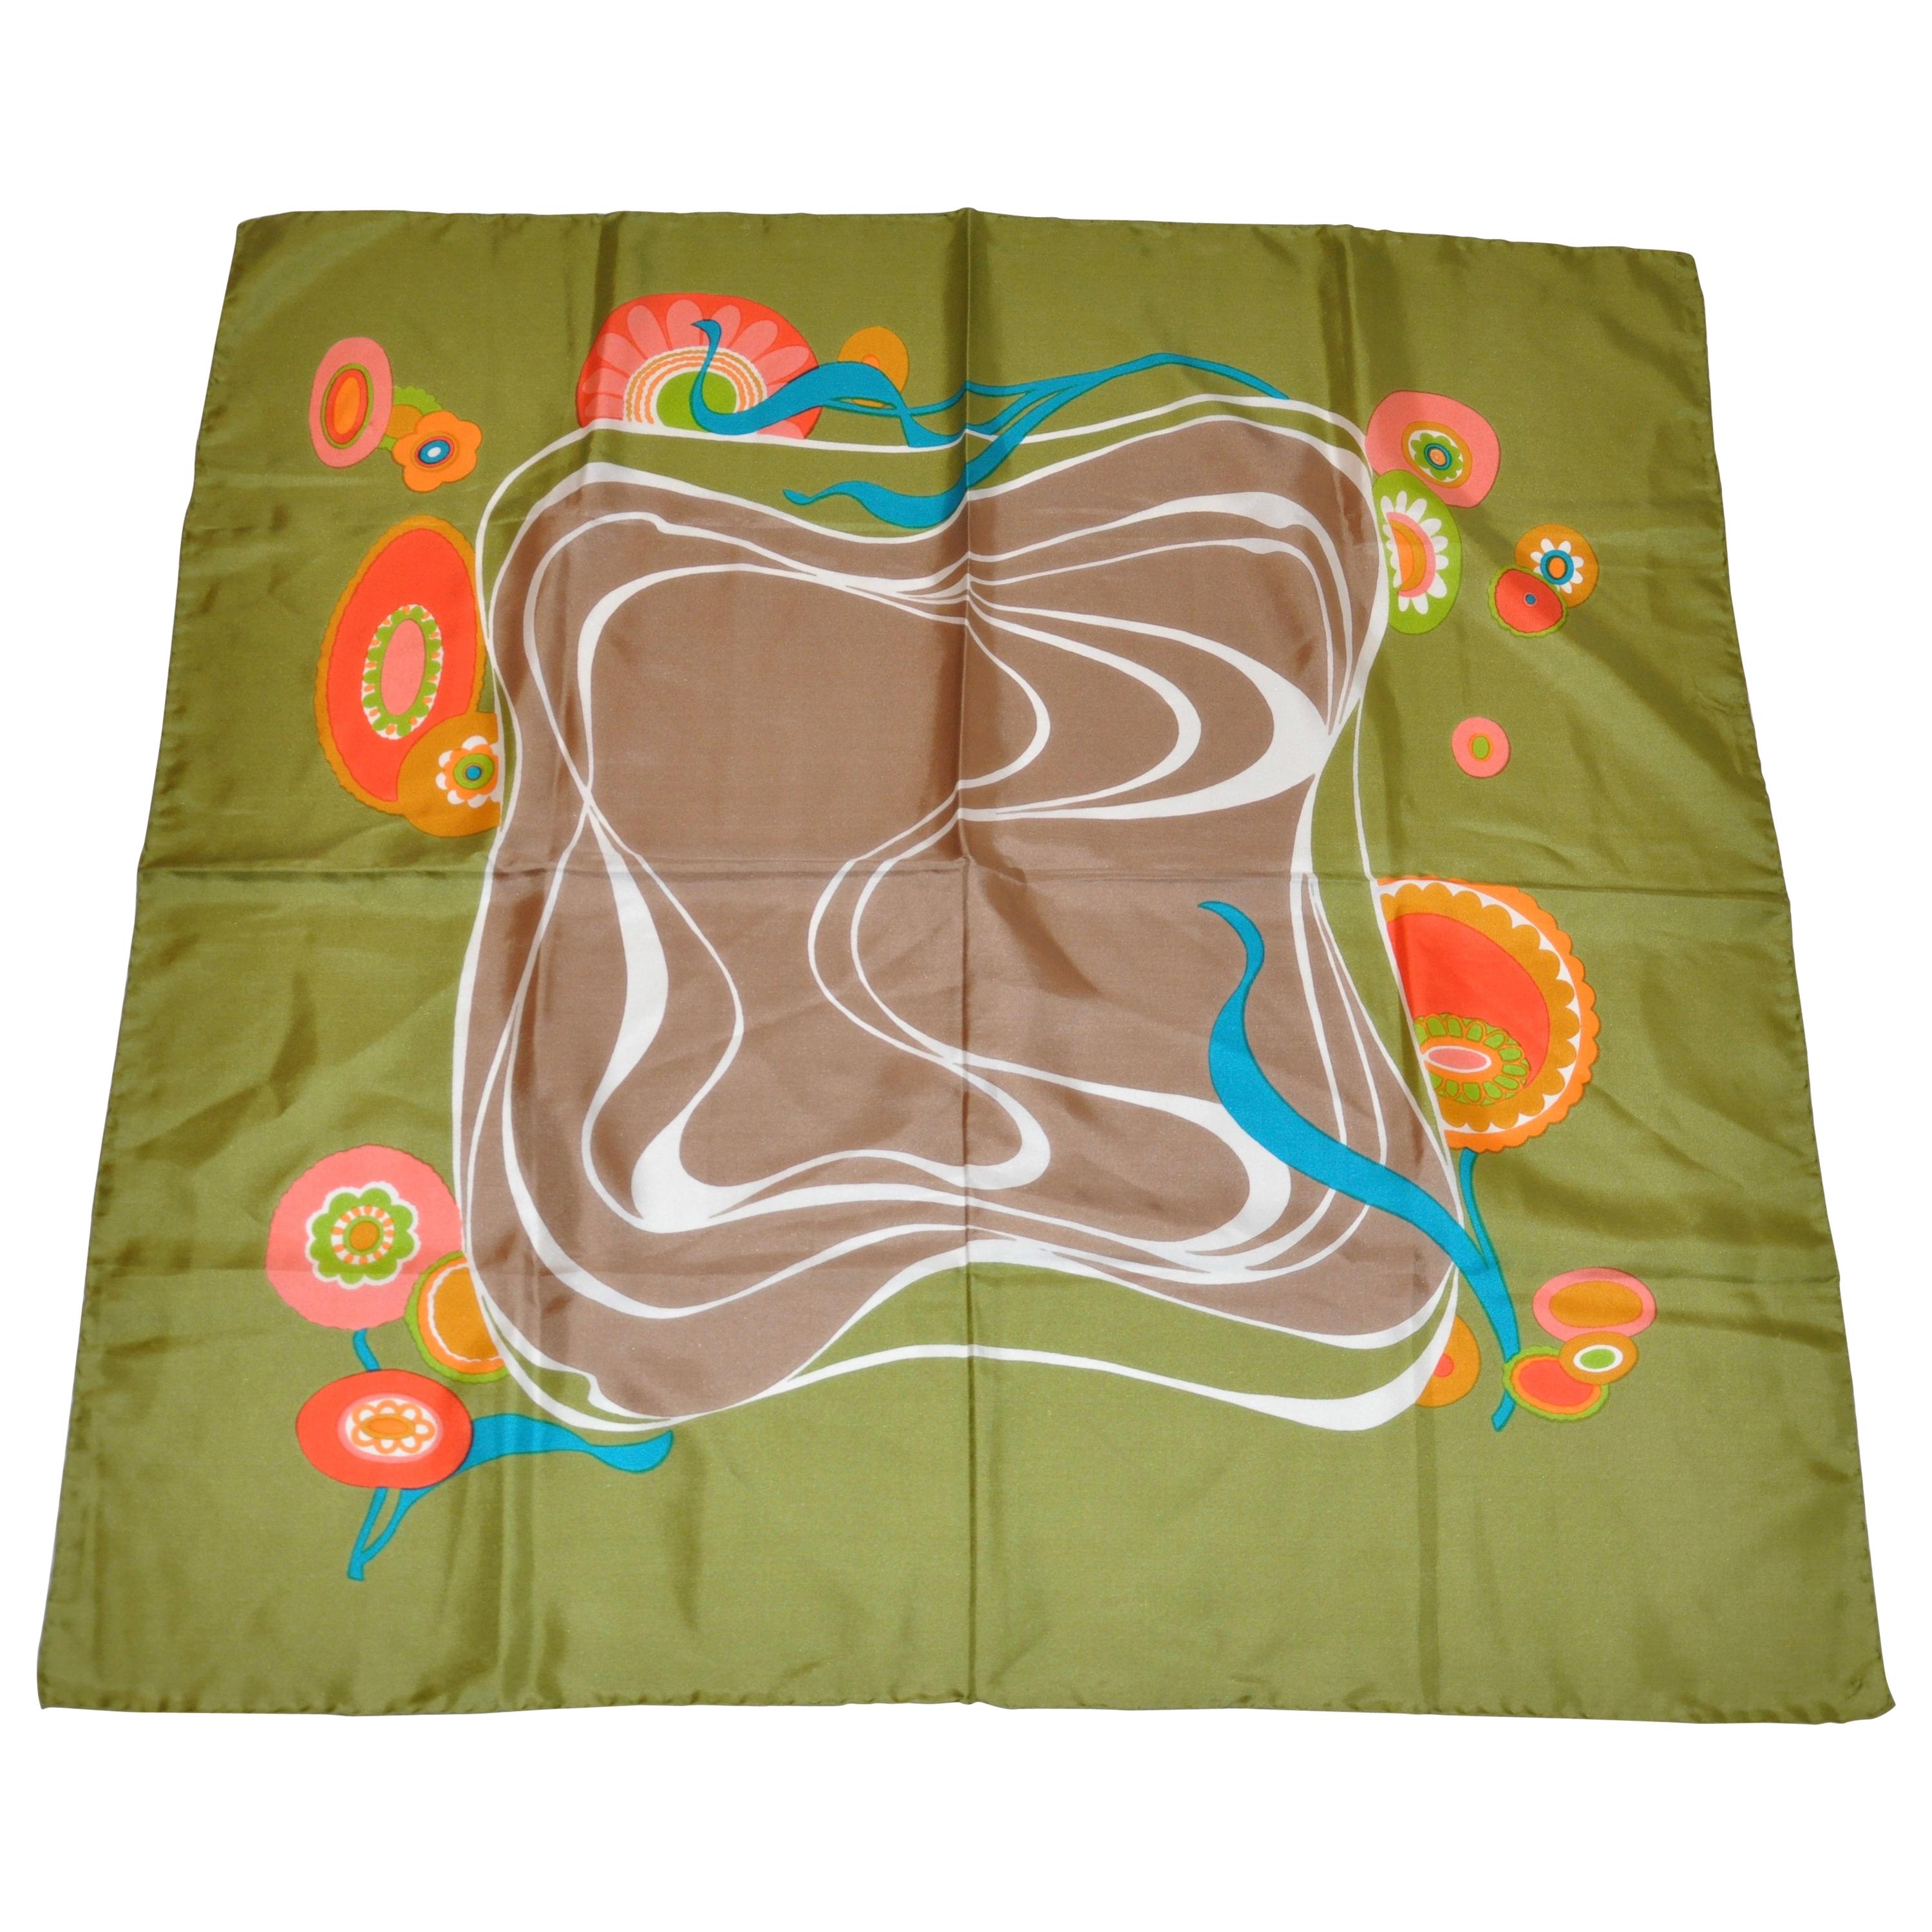 Olive-Green "Flowing Florals" Silk Scarf